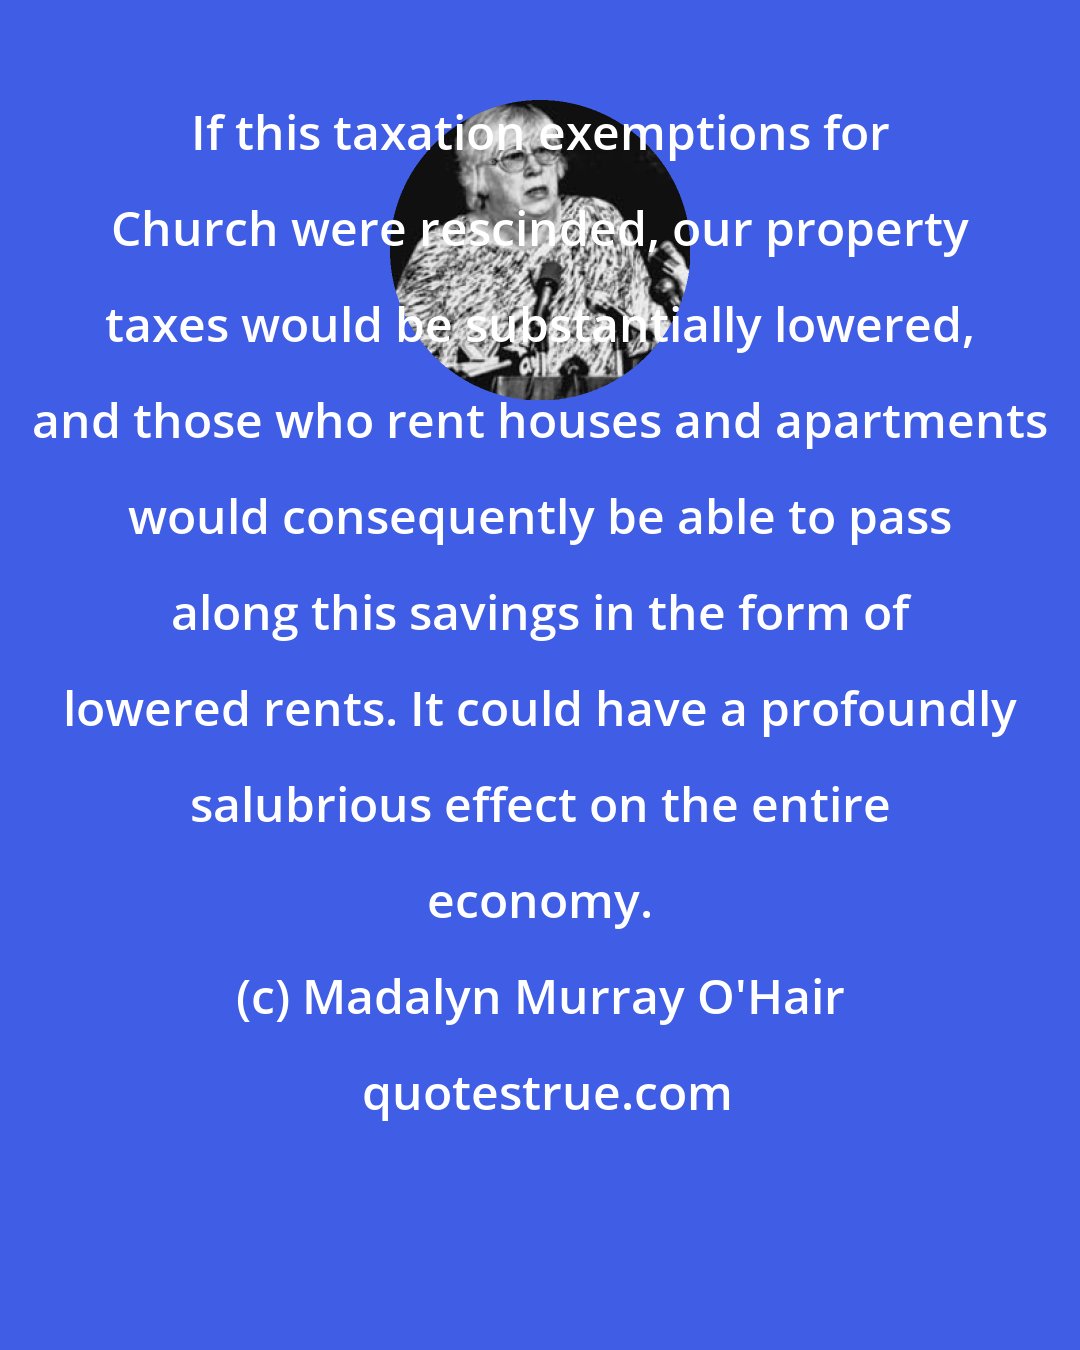 Madalyn Murray O'Hair: If this taxation exemptions for Church were rescinded, our property taxes would be substantially lowered, and those who rent houses and apartments would consequently be able to pass along this savings in the form of lowered rents. It could have a profoundly salubrious effect on the entire economy.